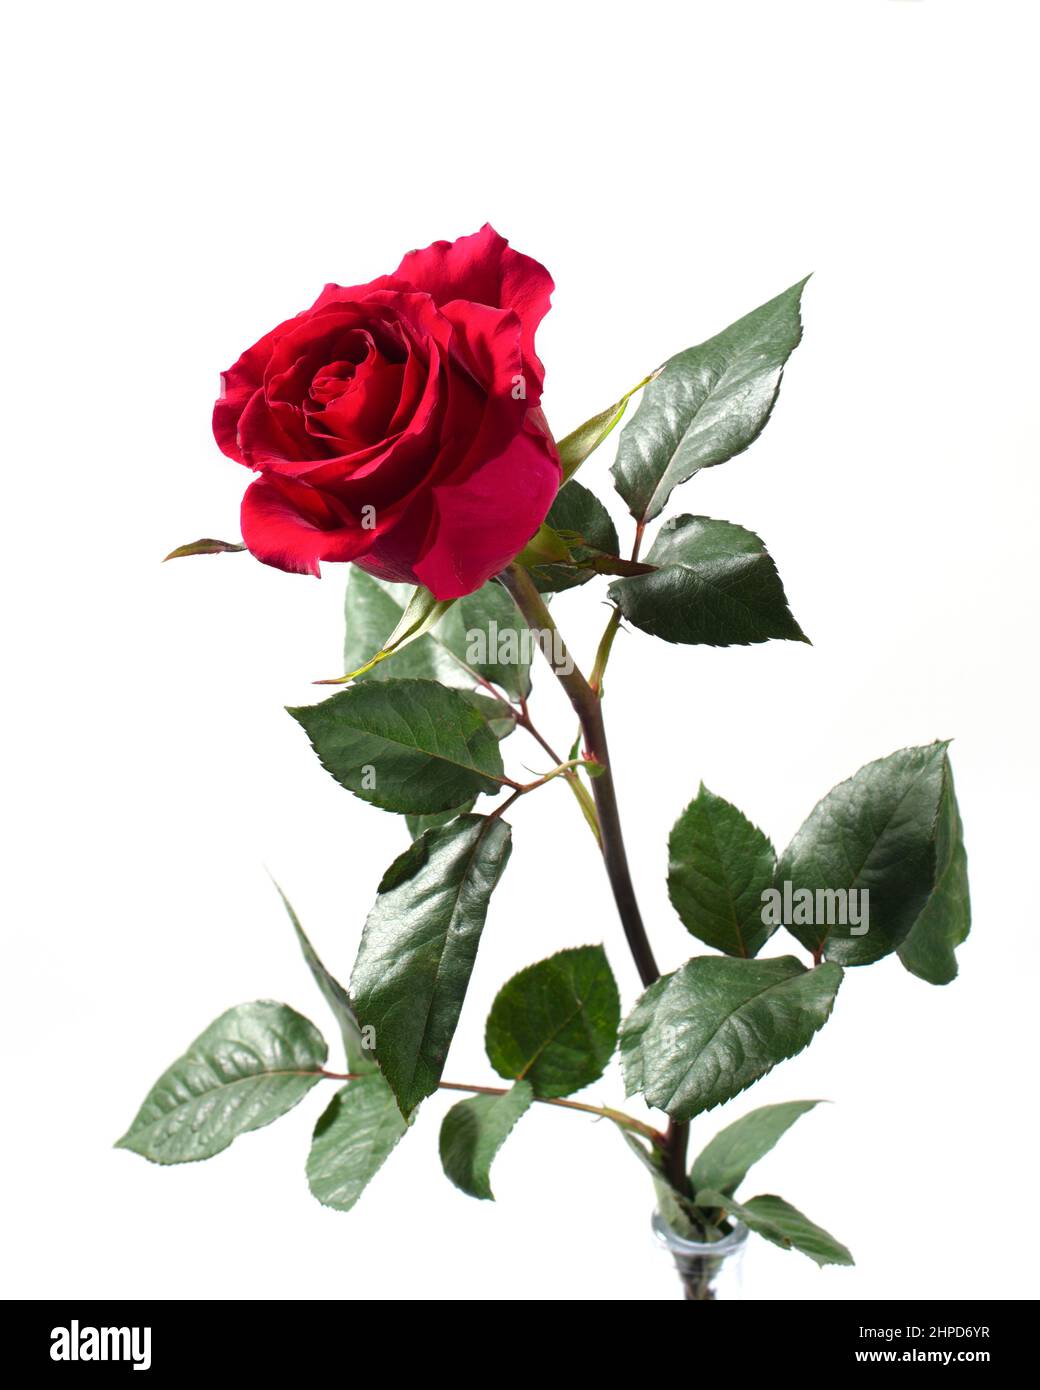 Dark red rose flover isolated on white background. Stock Photo